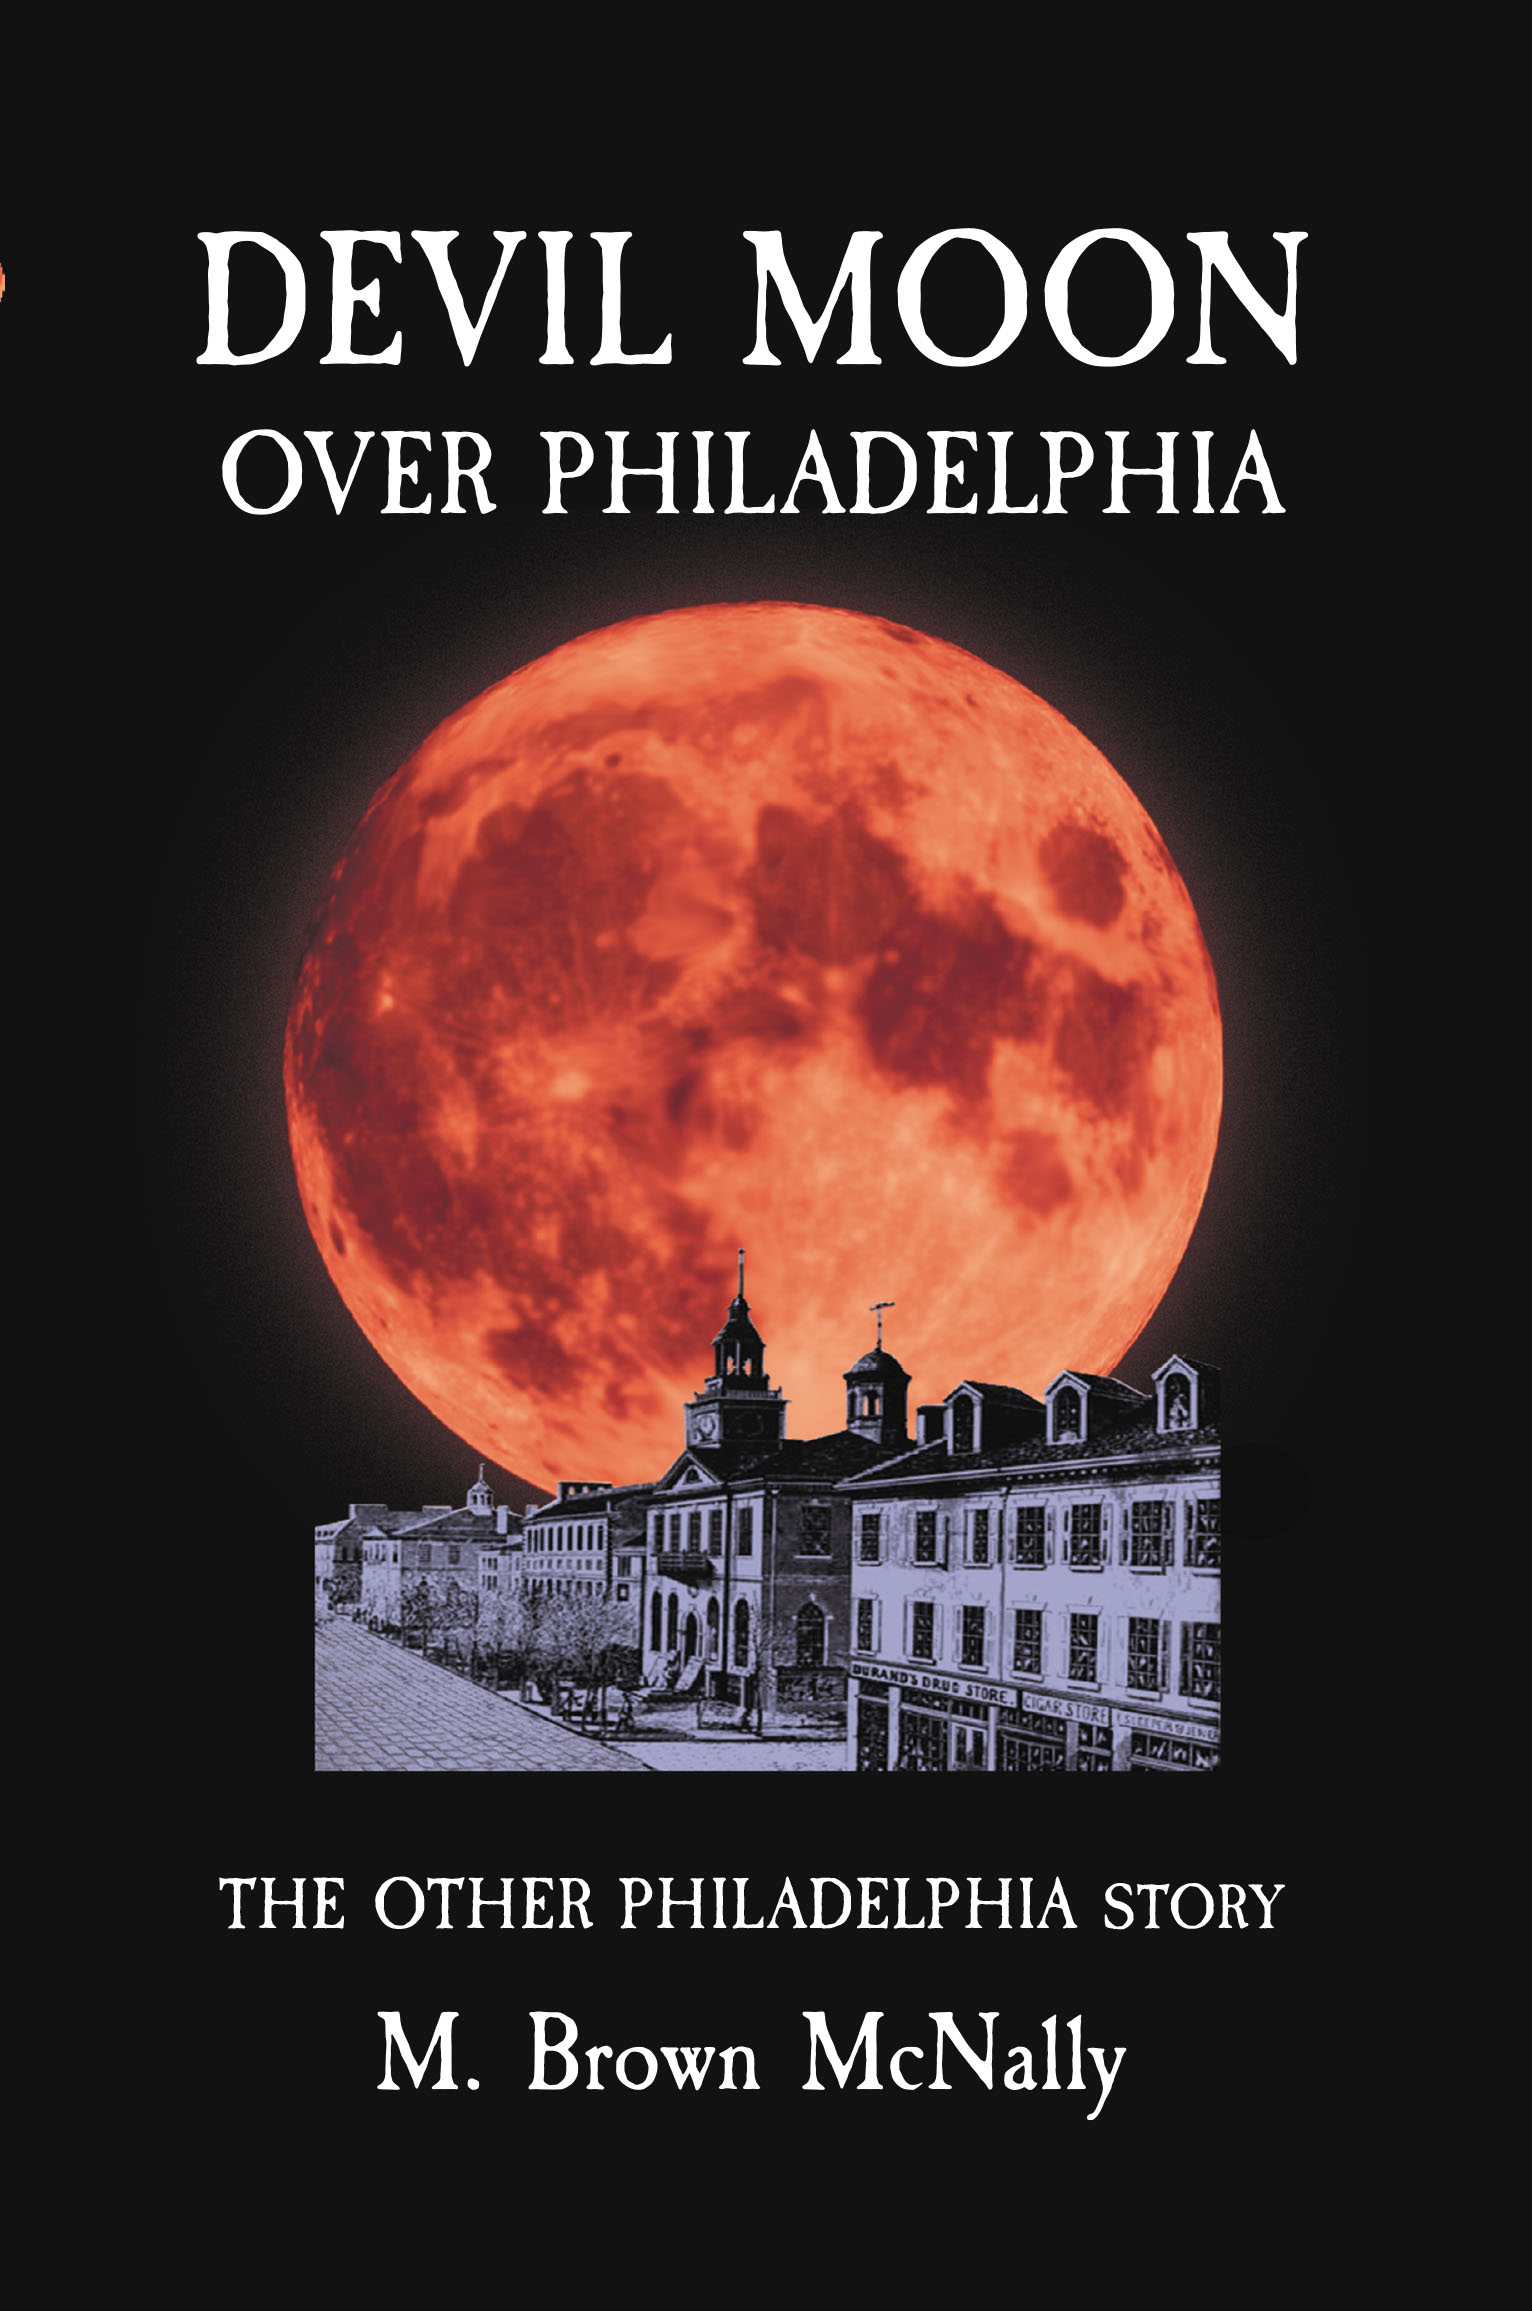 M. Brown McNally’s New Book, "Devil Moon Over Philadelphia," Tells the Author's Family History of Fleeing from Scotland to Ireland Then to America to Pursue a Better Life